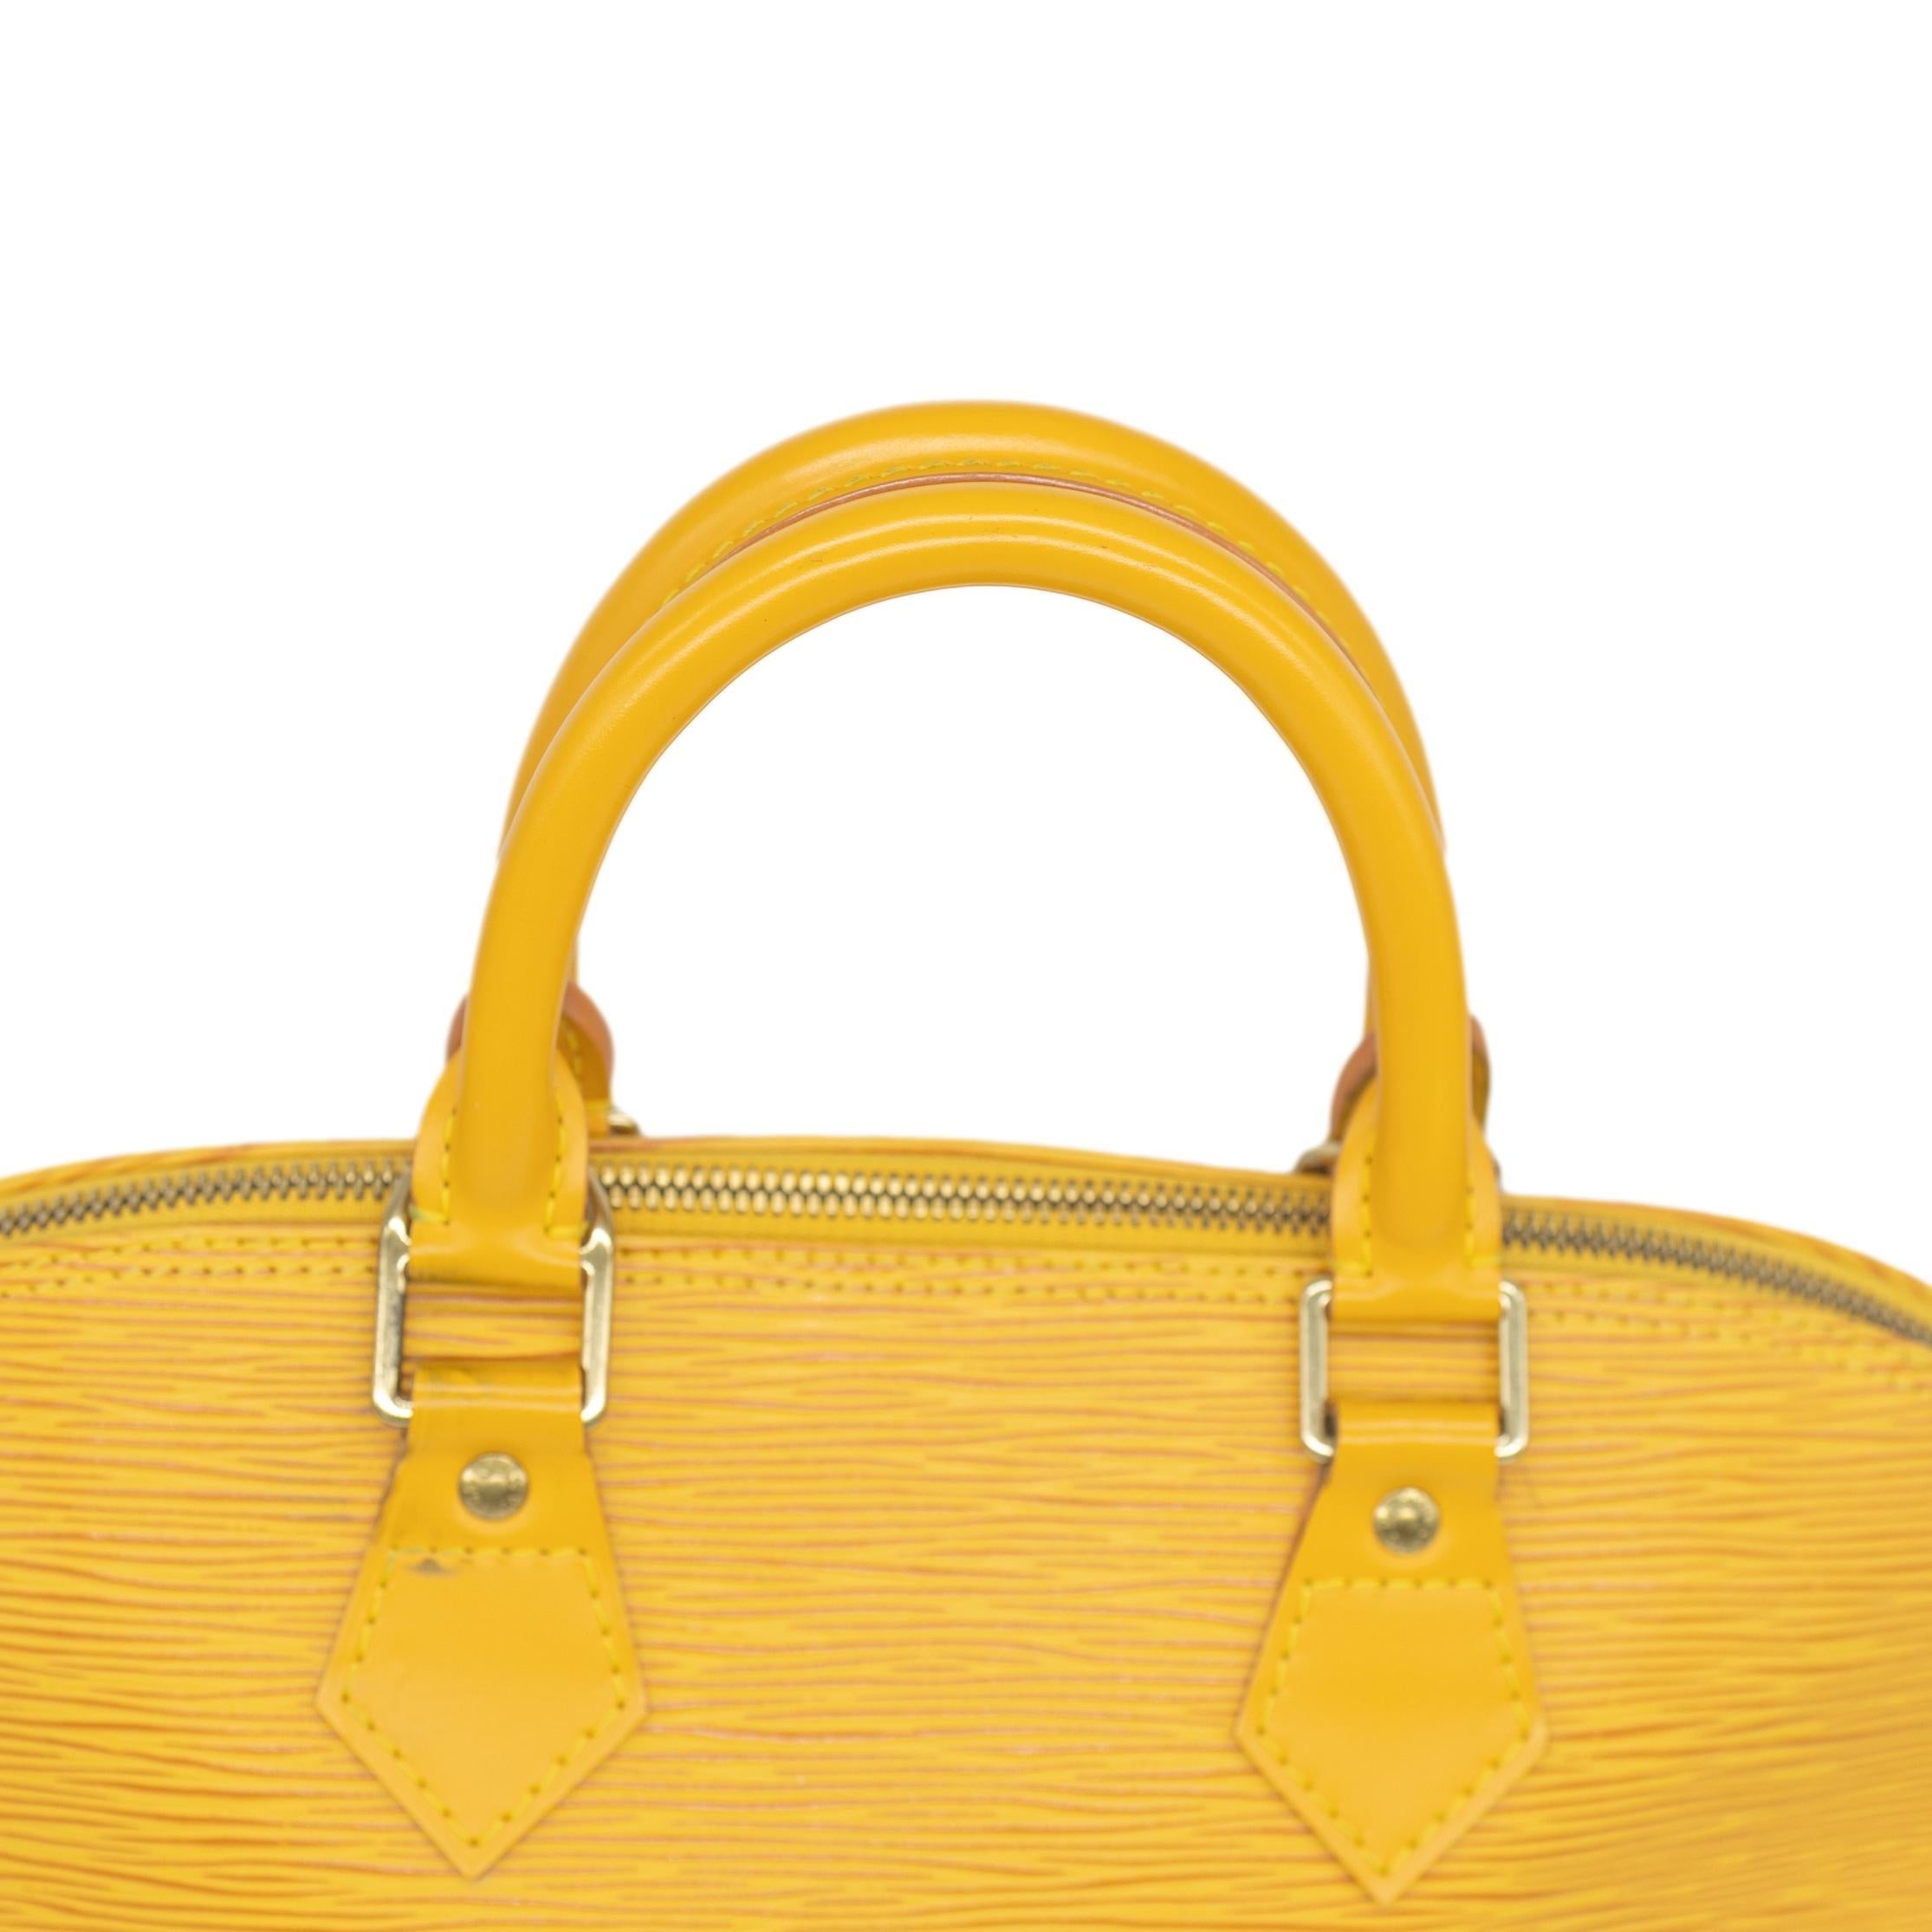 Louis Vuitton Mimosa Yellow EPI Leather Alma PM Top Handle Bag, 1996. For Sale 1